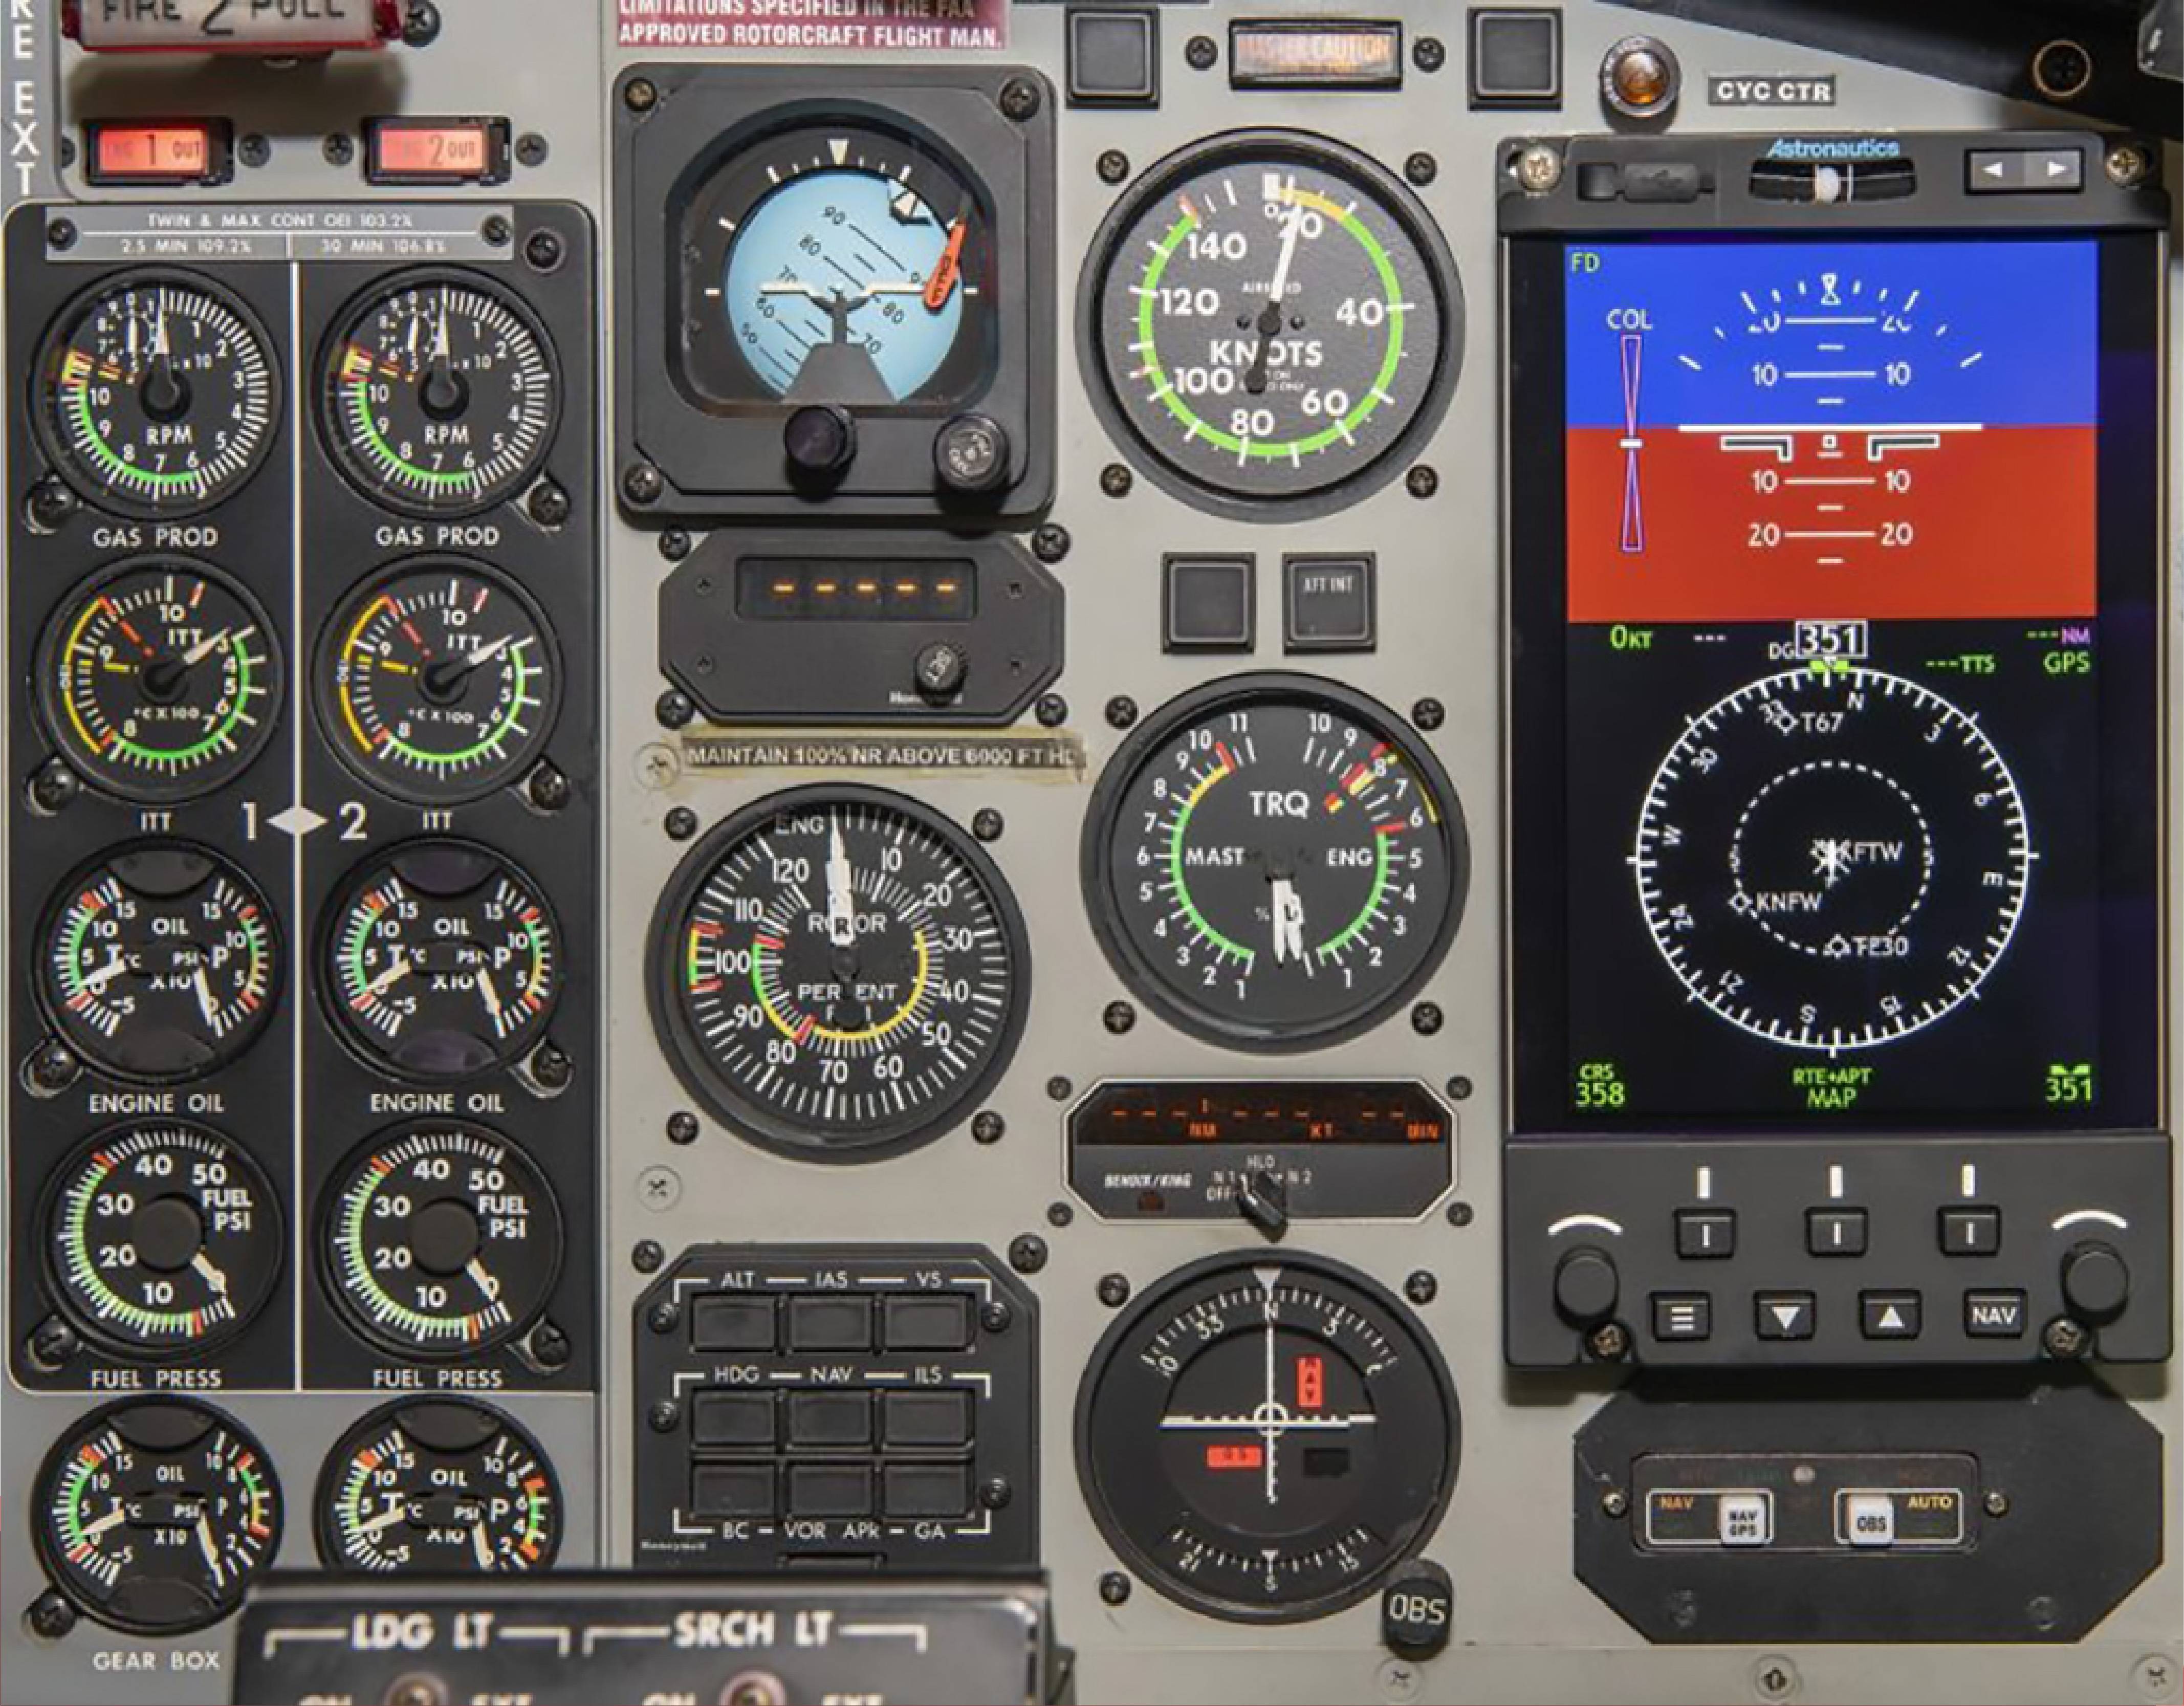 The RoadRunner EFI interfaces seamlessly with modern digital navigation, enabling the Firehawk to fly firefighting and other missions with enhanced safety and reliability. Astronautics Photo